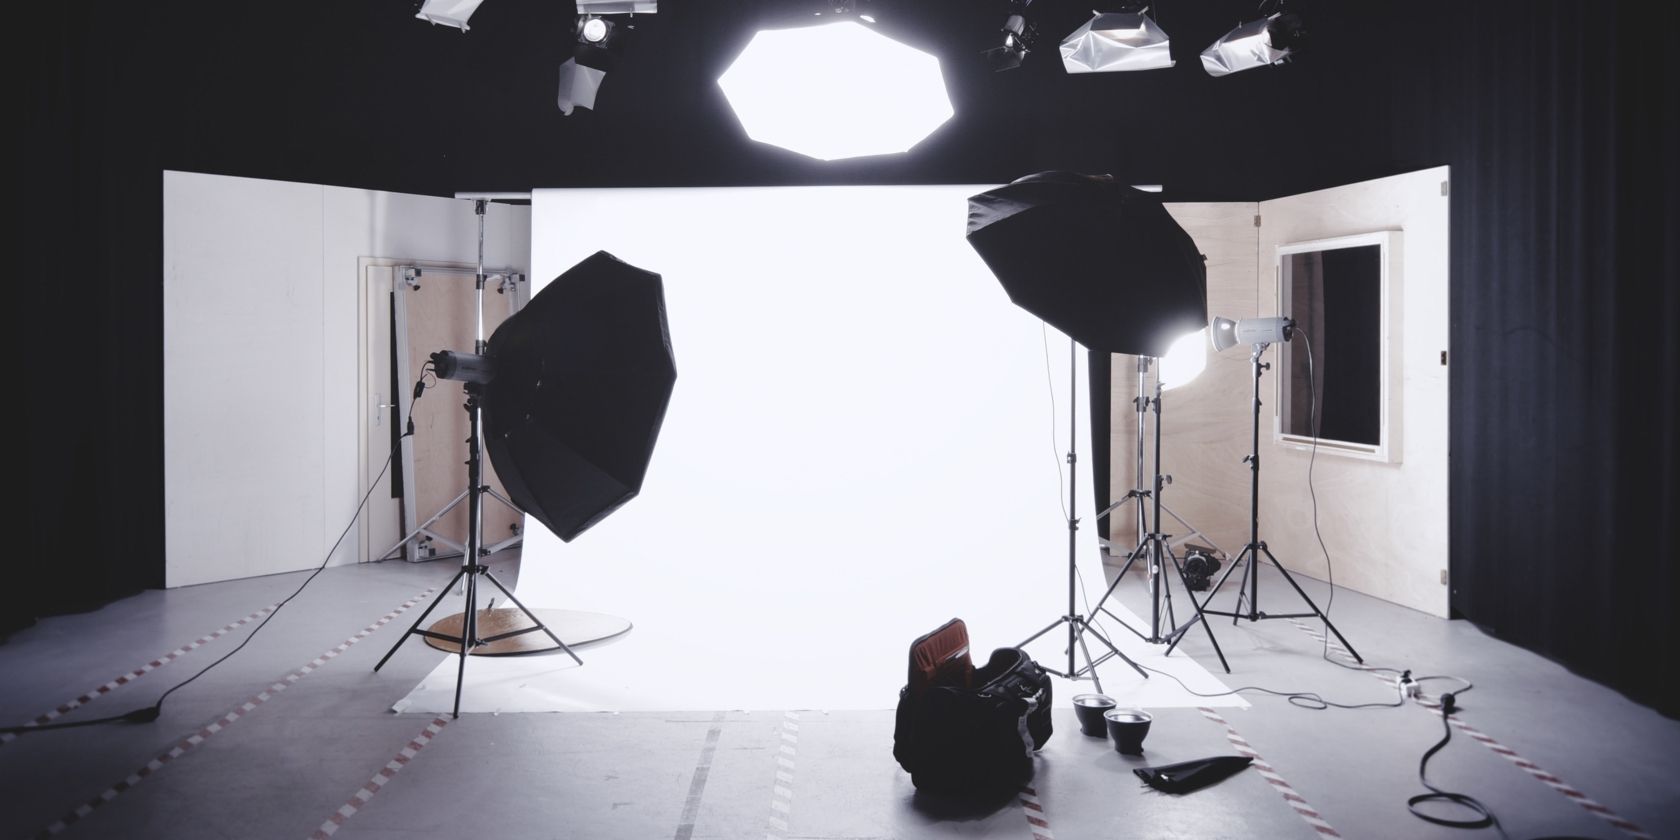 Basic studio lighting usually involves the use of one or more strobe lights.